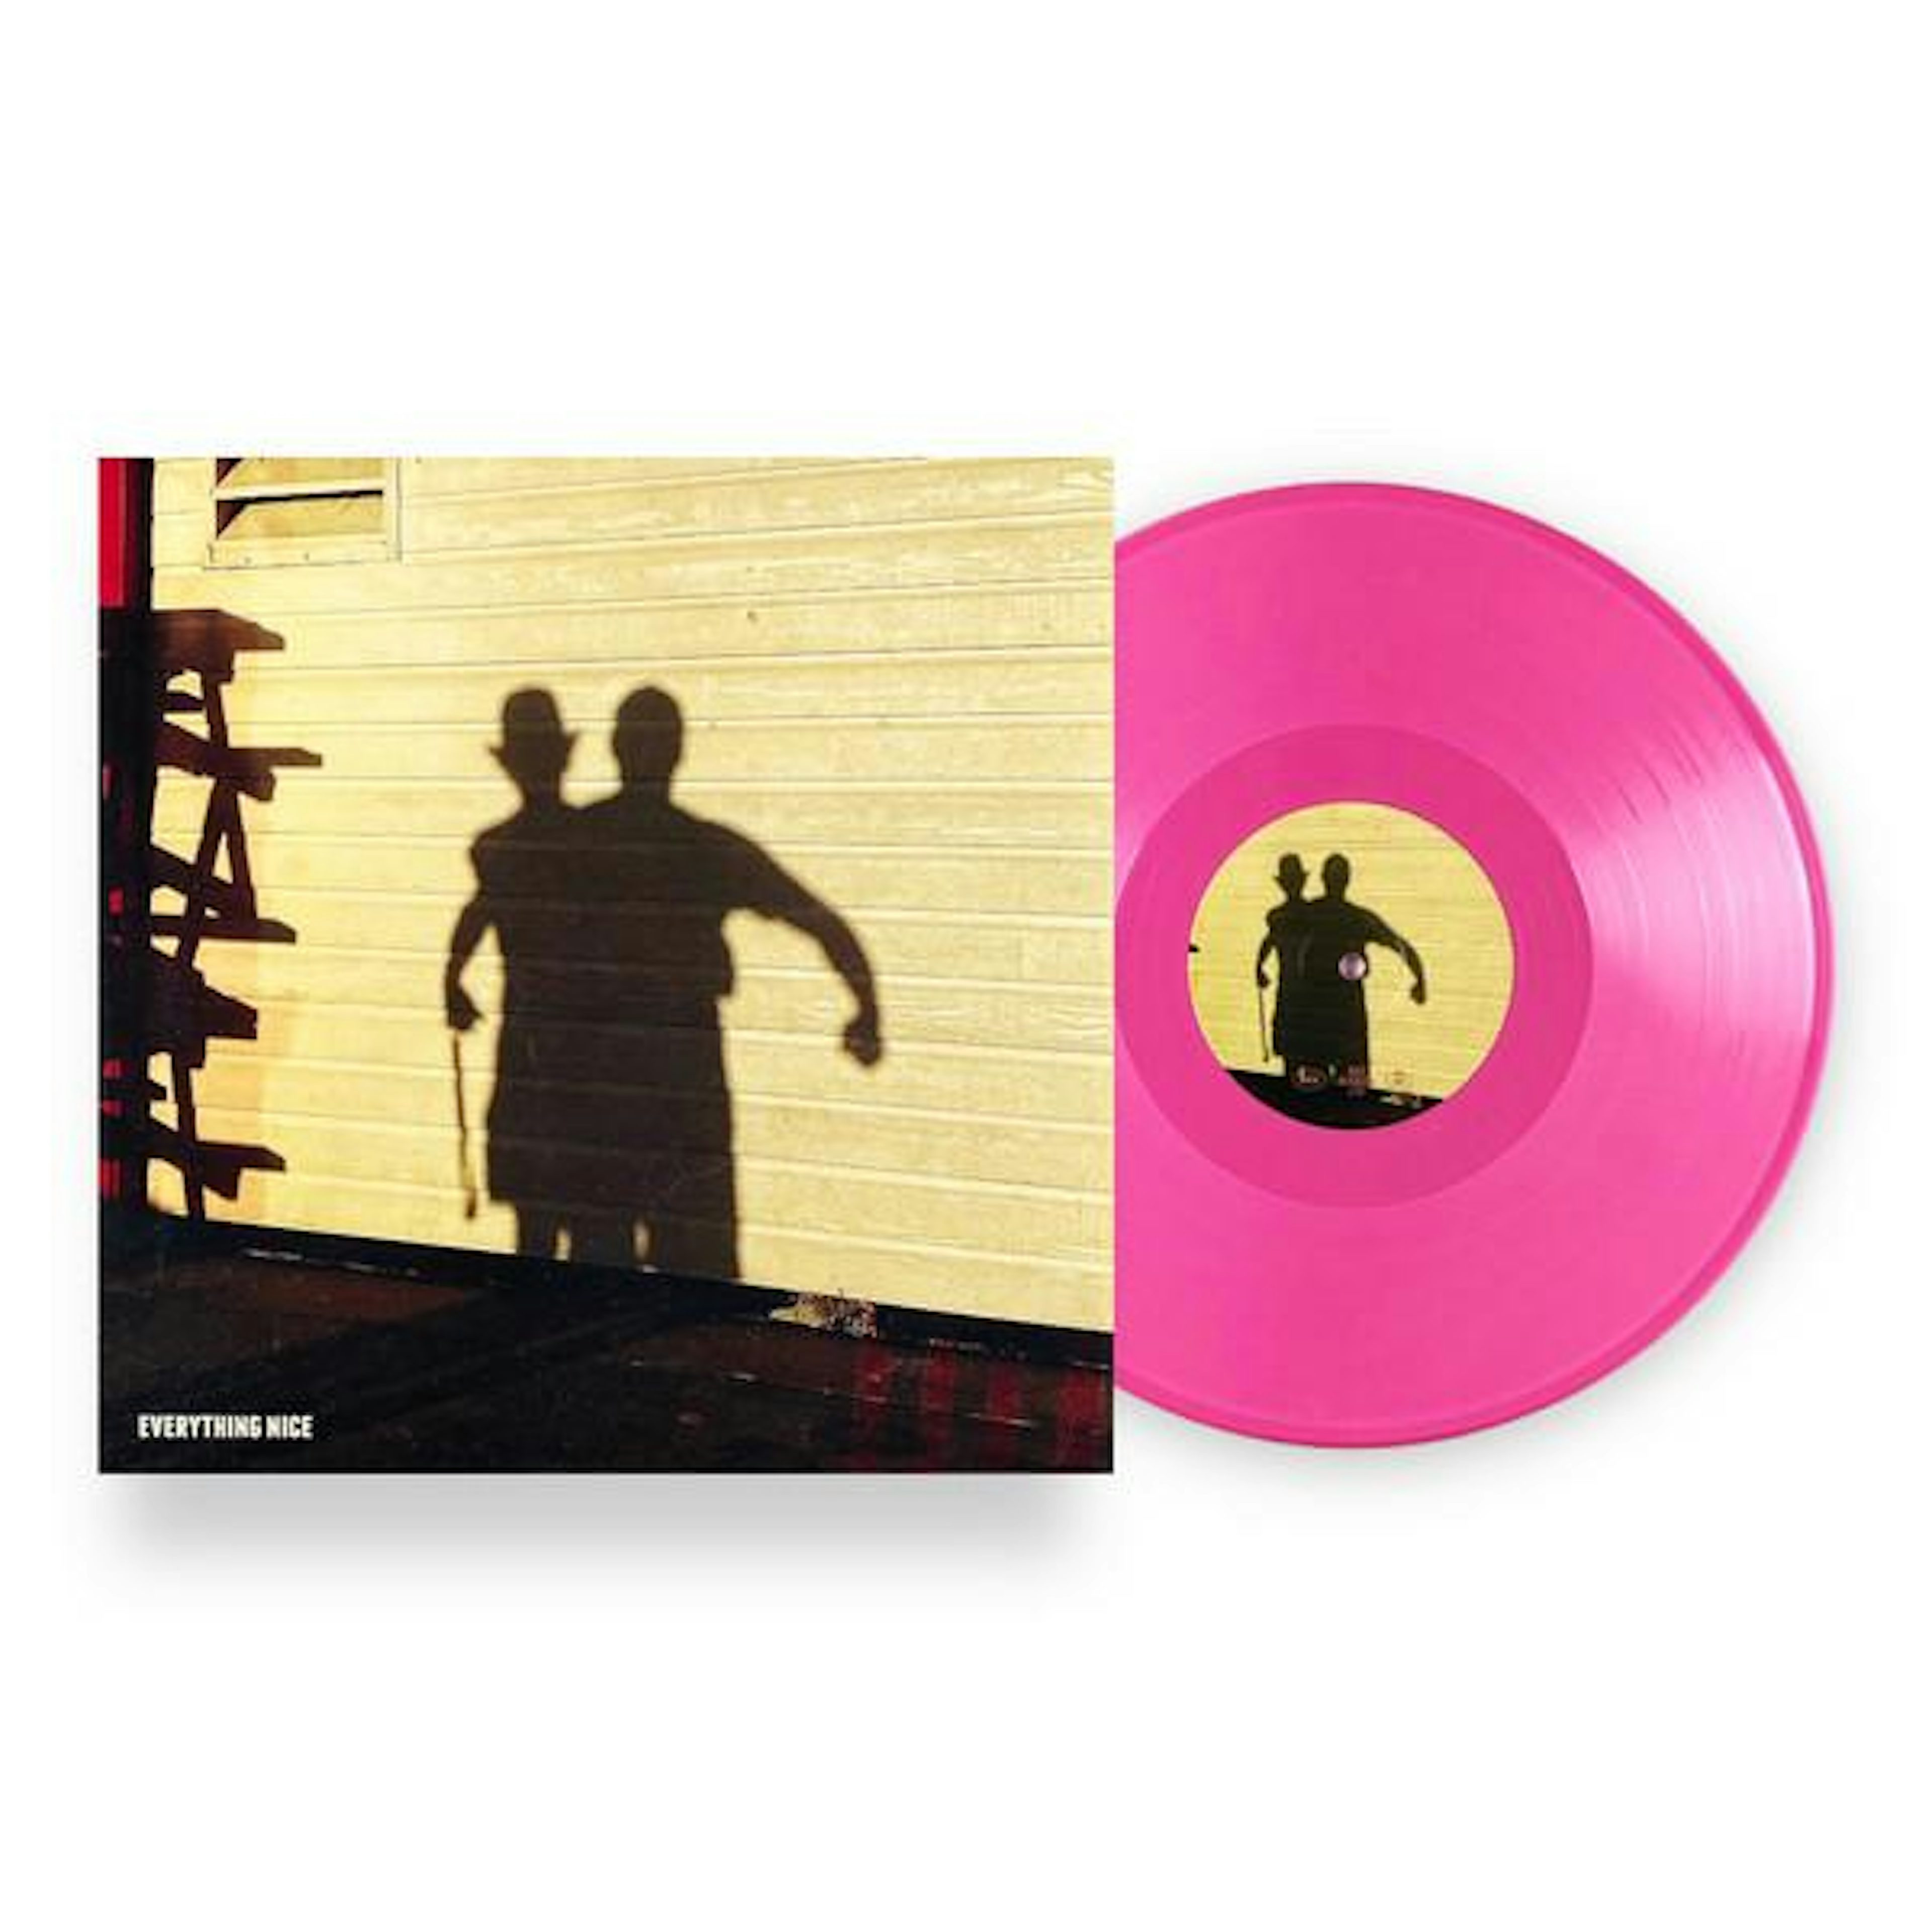 Length EVERYTHING NICE / WHAT'S YOURS (PINK VINYL) Vinyl Record